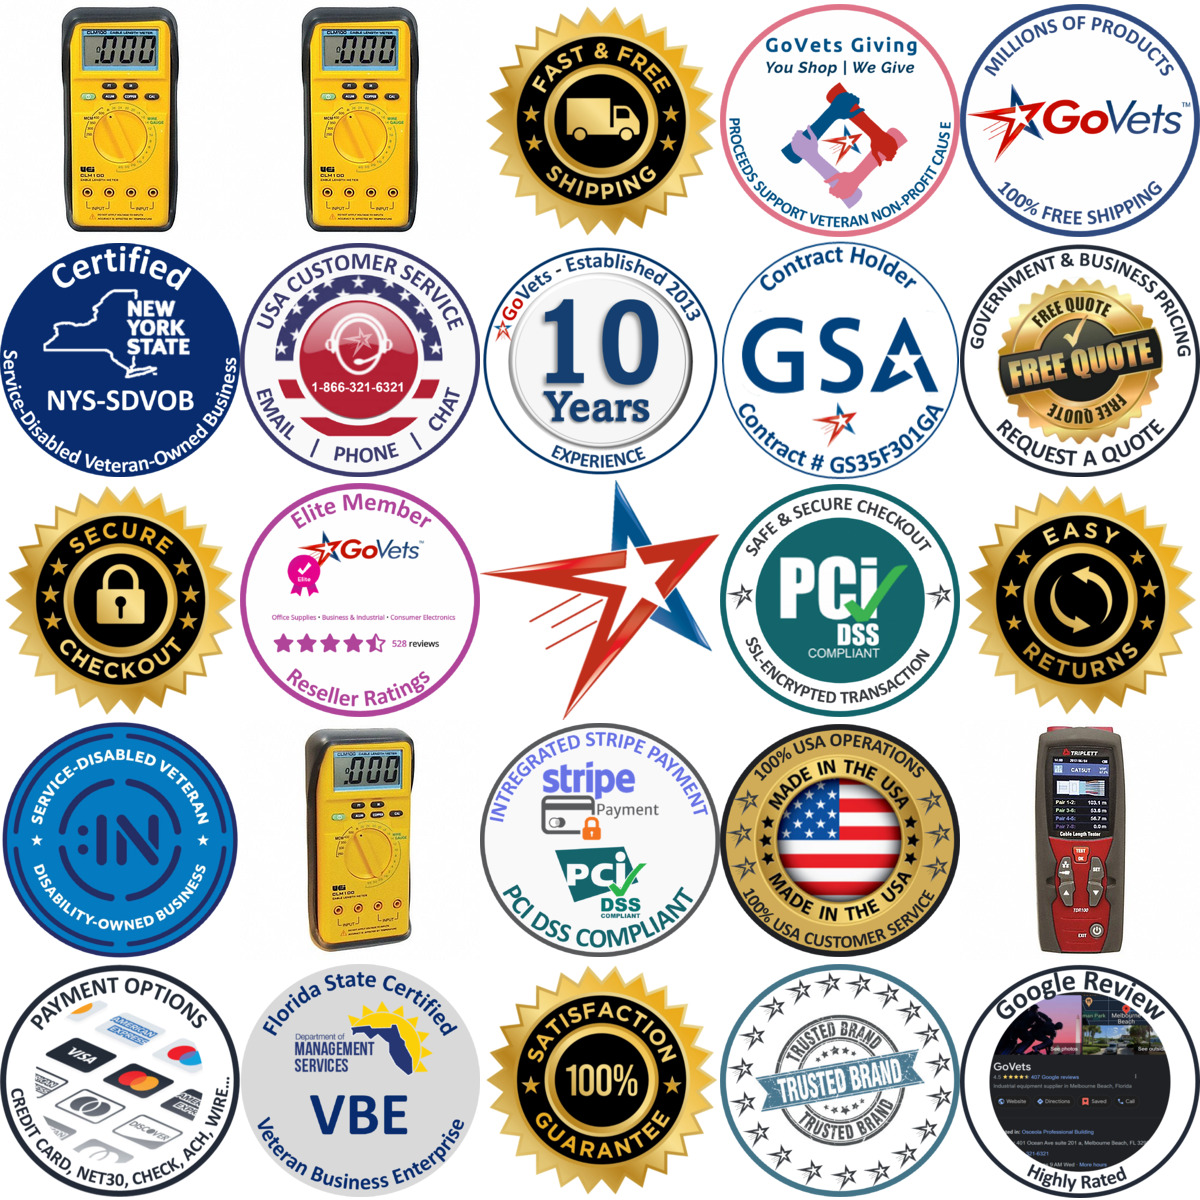 A selection of Wire Length Meters products on GoVets